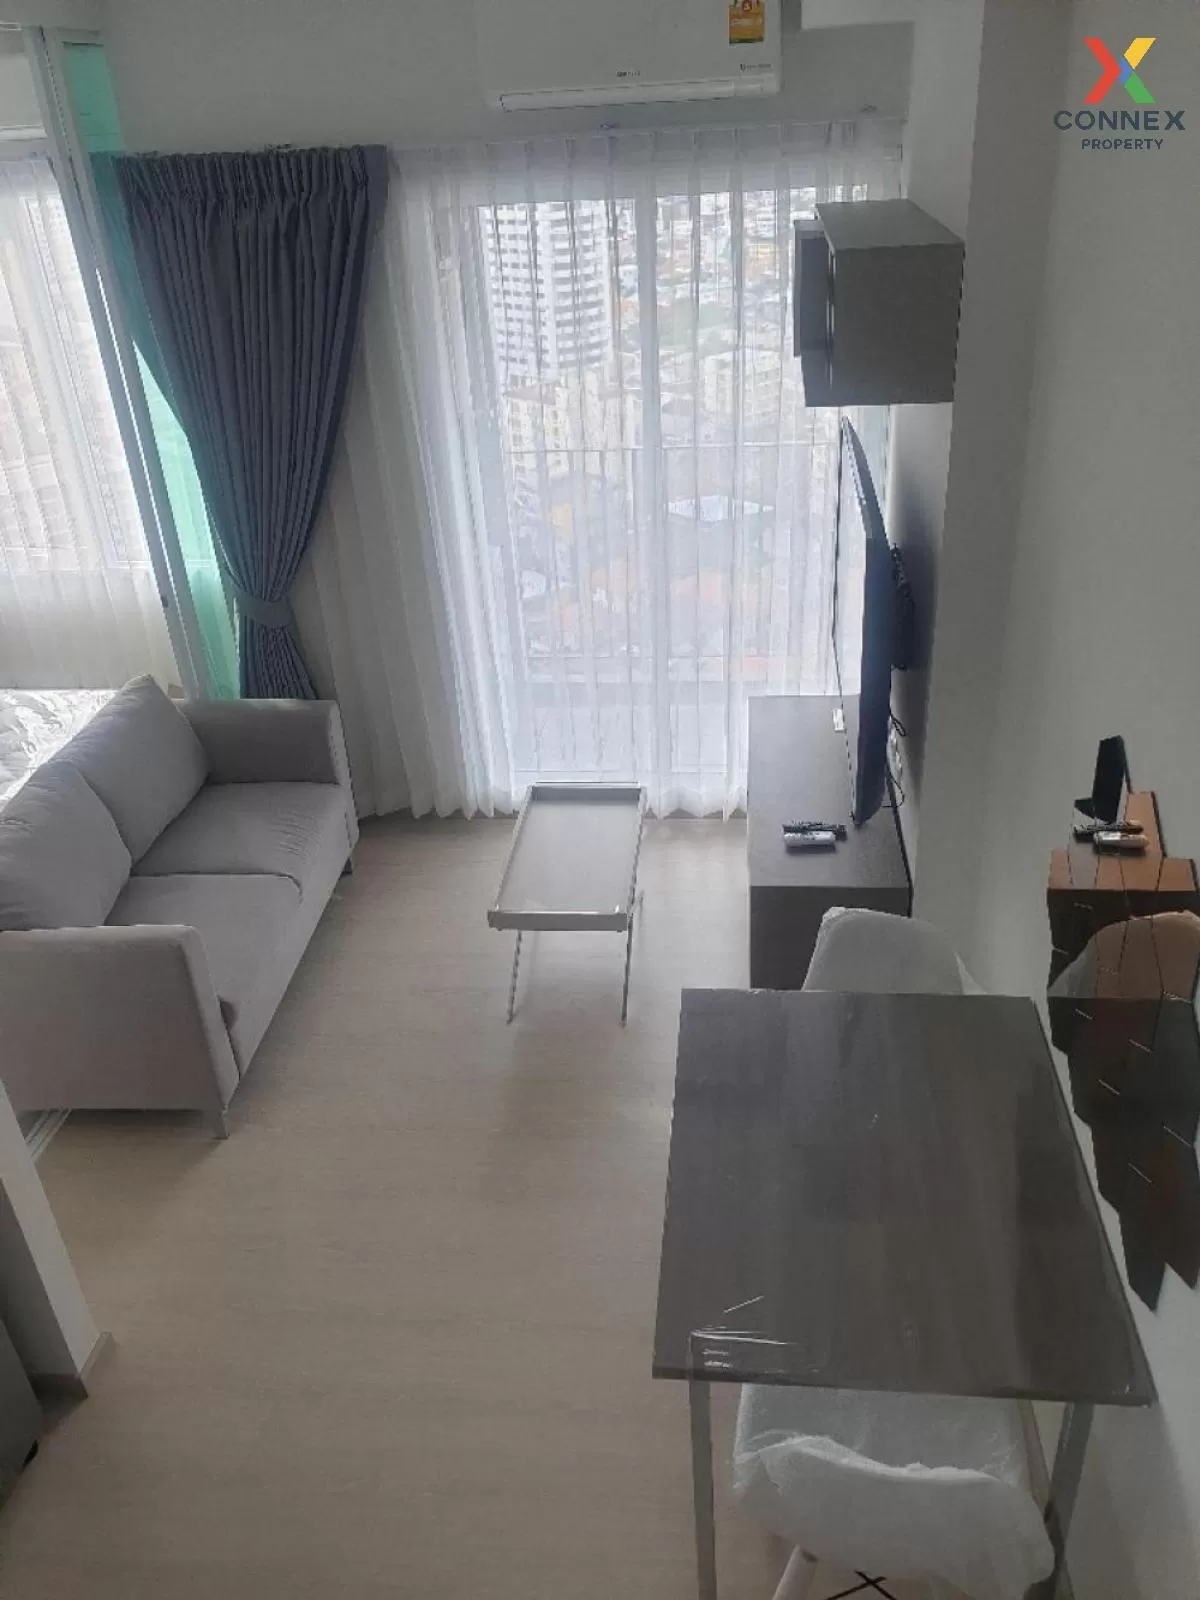 For Rent Condo , Chapter One Eco Ratchada Huaikhwang , MRT-Huai Khwang , Huai Khwang , Huai Khwang , Bangkok , CX-84312